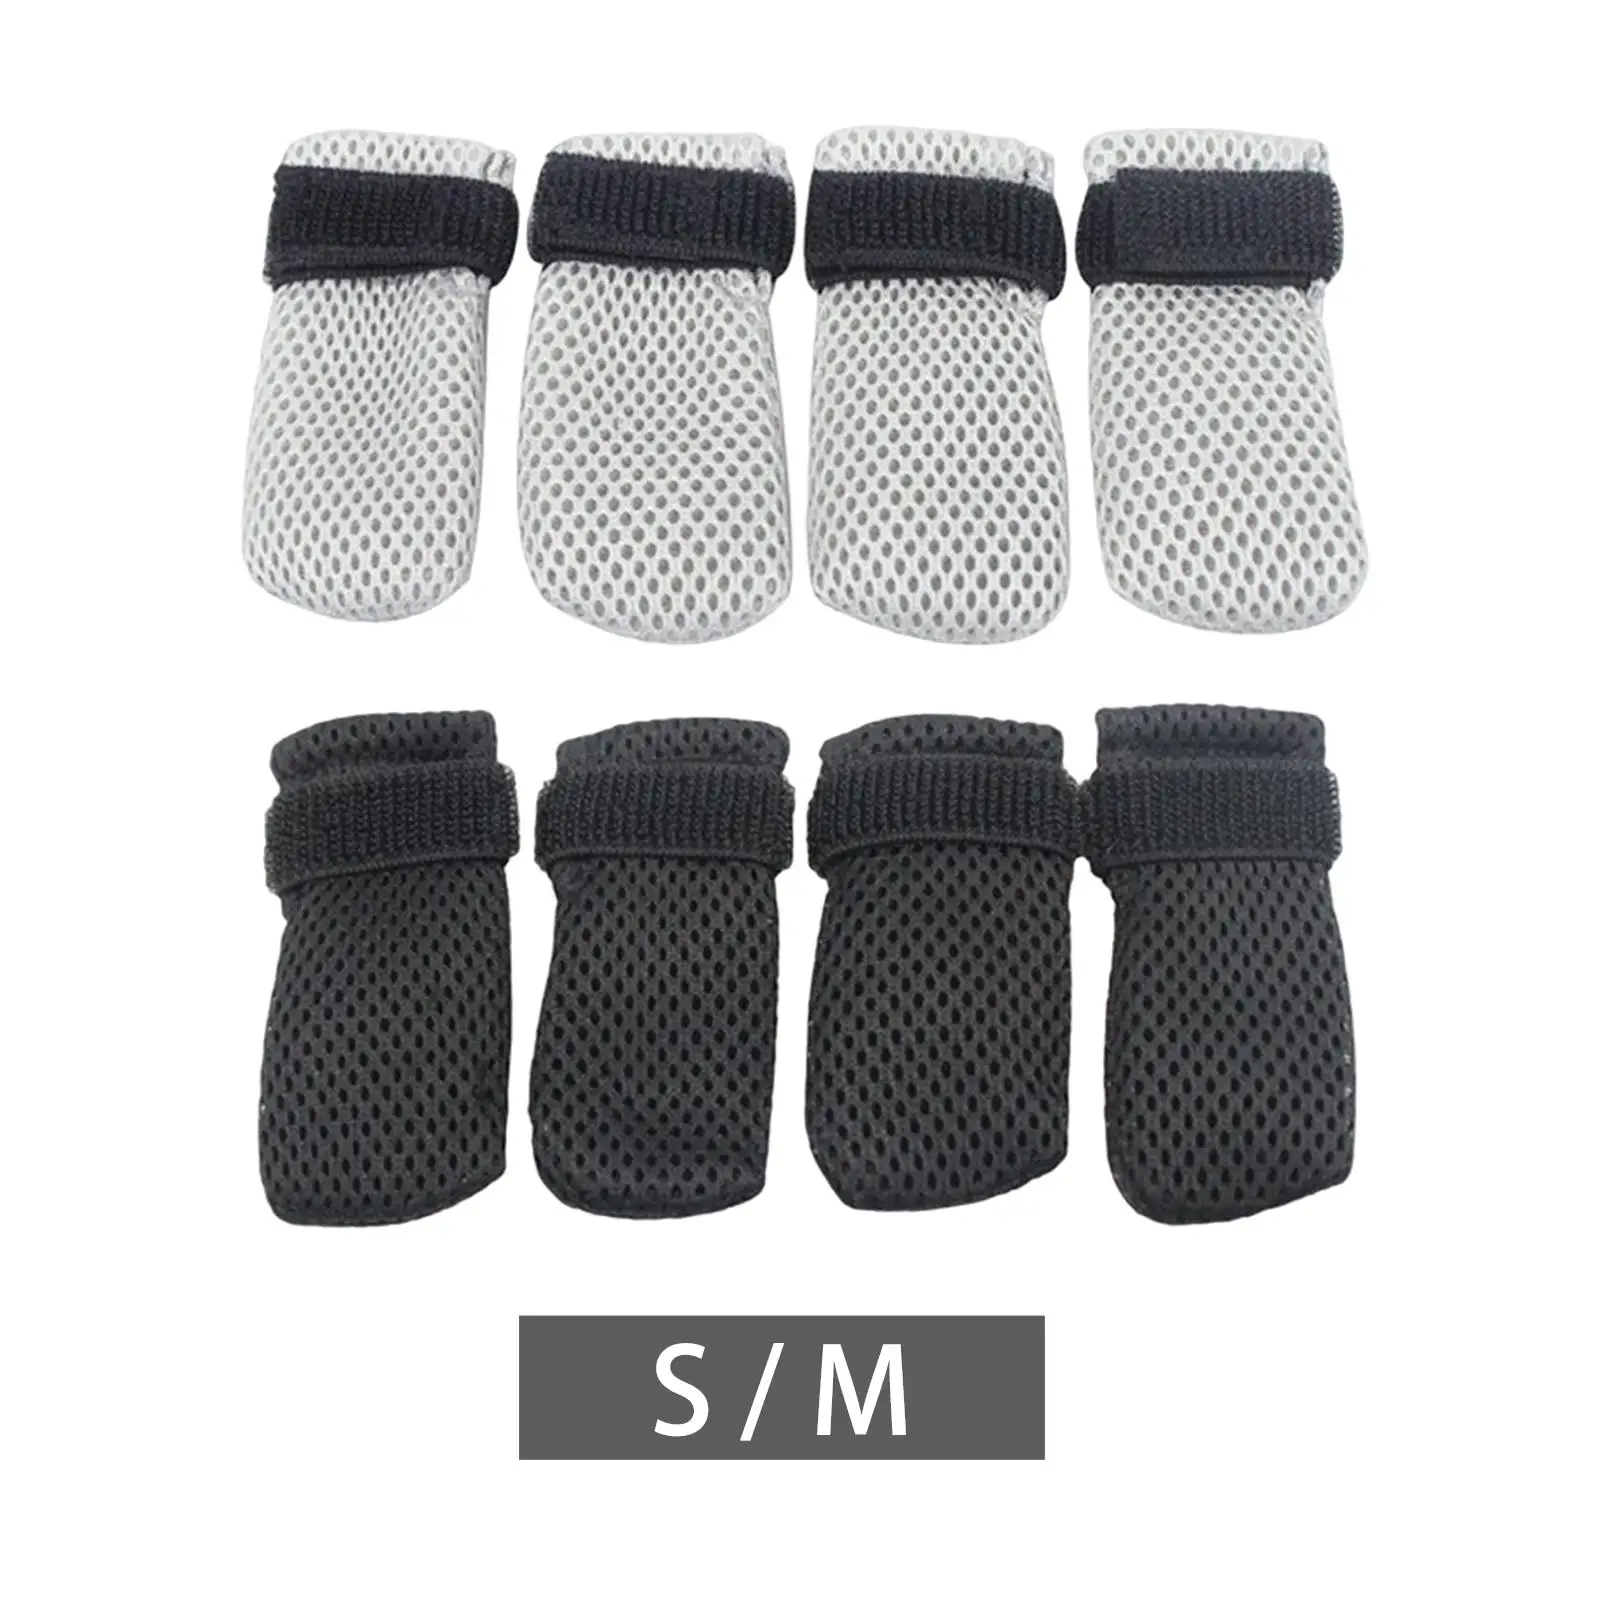 Anti Scratch Boots, 4Pcs Pet Cat Bathing Cut Nail Shaving Hair Anti Grab Covers Adjustable Cat protector Shoes Claw Care